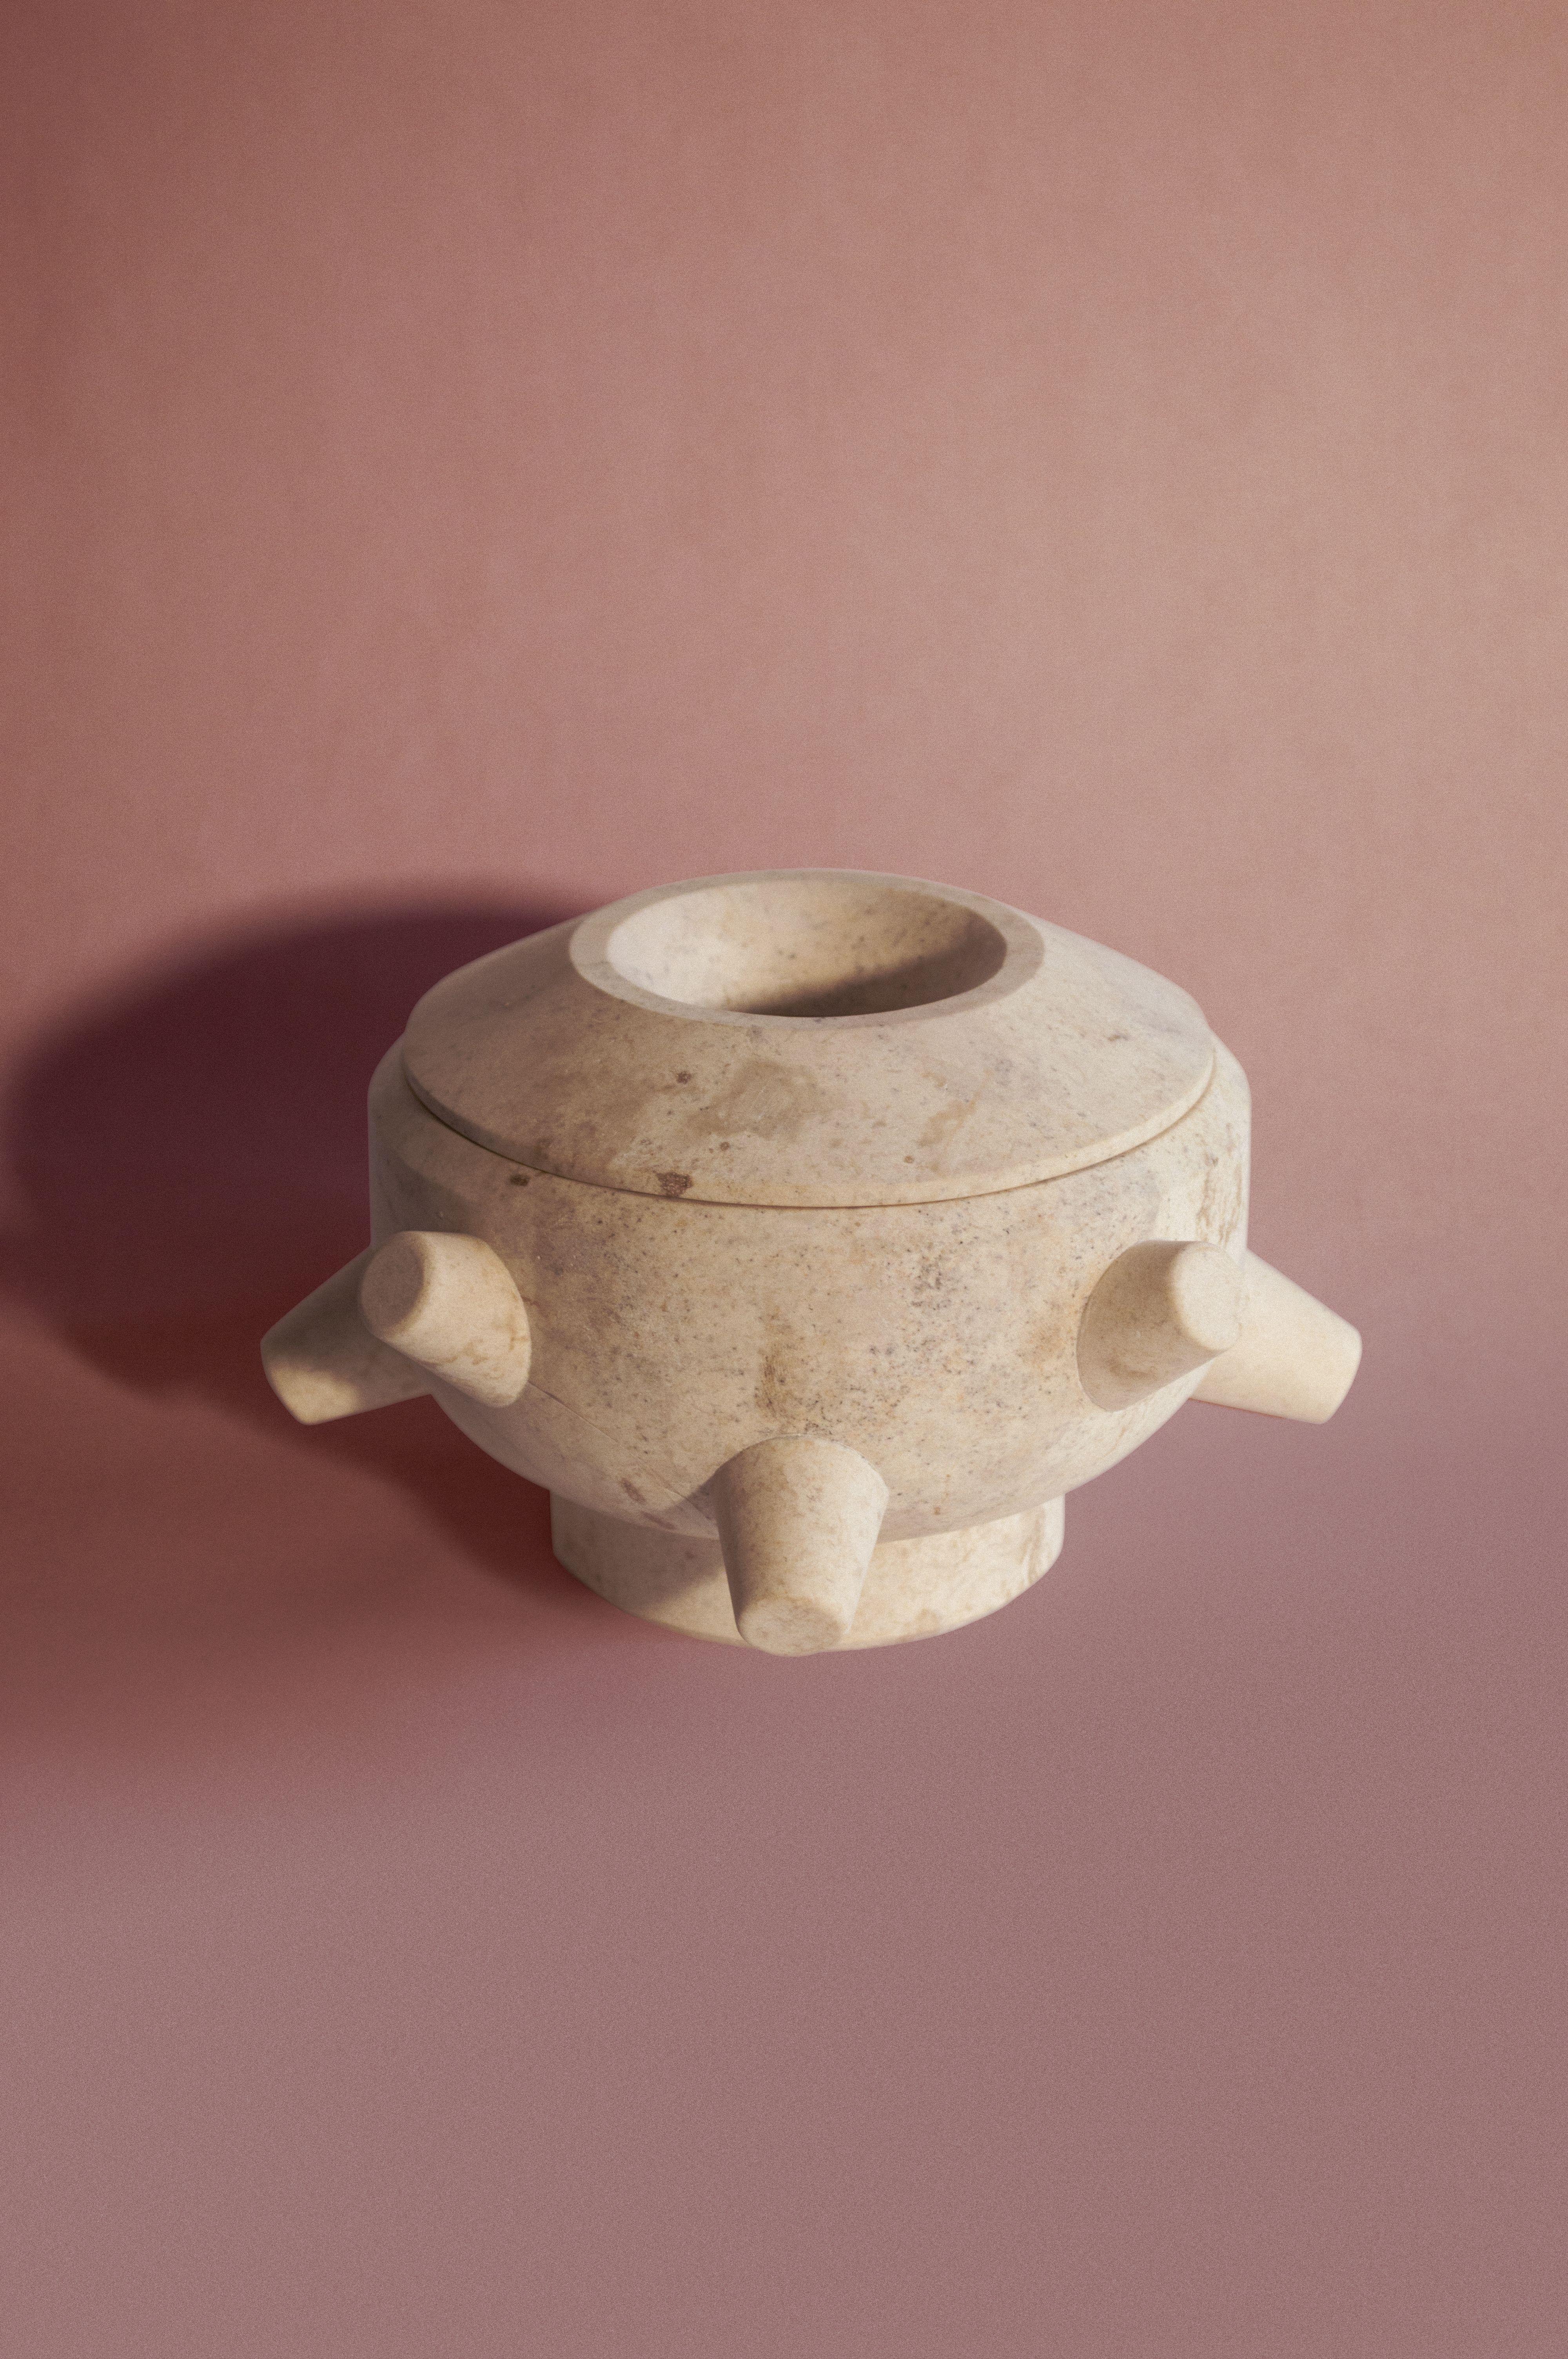 Copalera No. 4 Incense Burner by Acoocooro
Dimensions: Ø 16 x H 9.5 cm.
Materials: Crema maya (Yucatán peninsula marble) incense burner and lid.
Veining and mineral composition may give unique appearance to each piece.

Copalera create a play